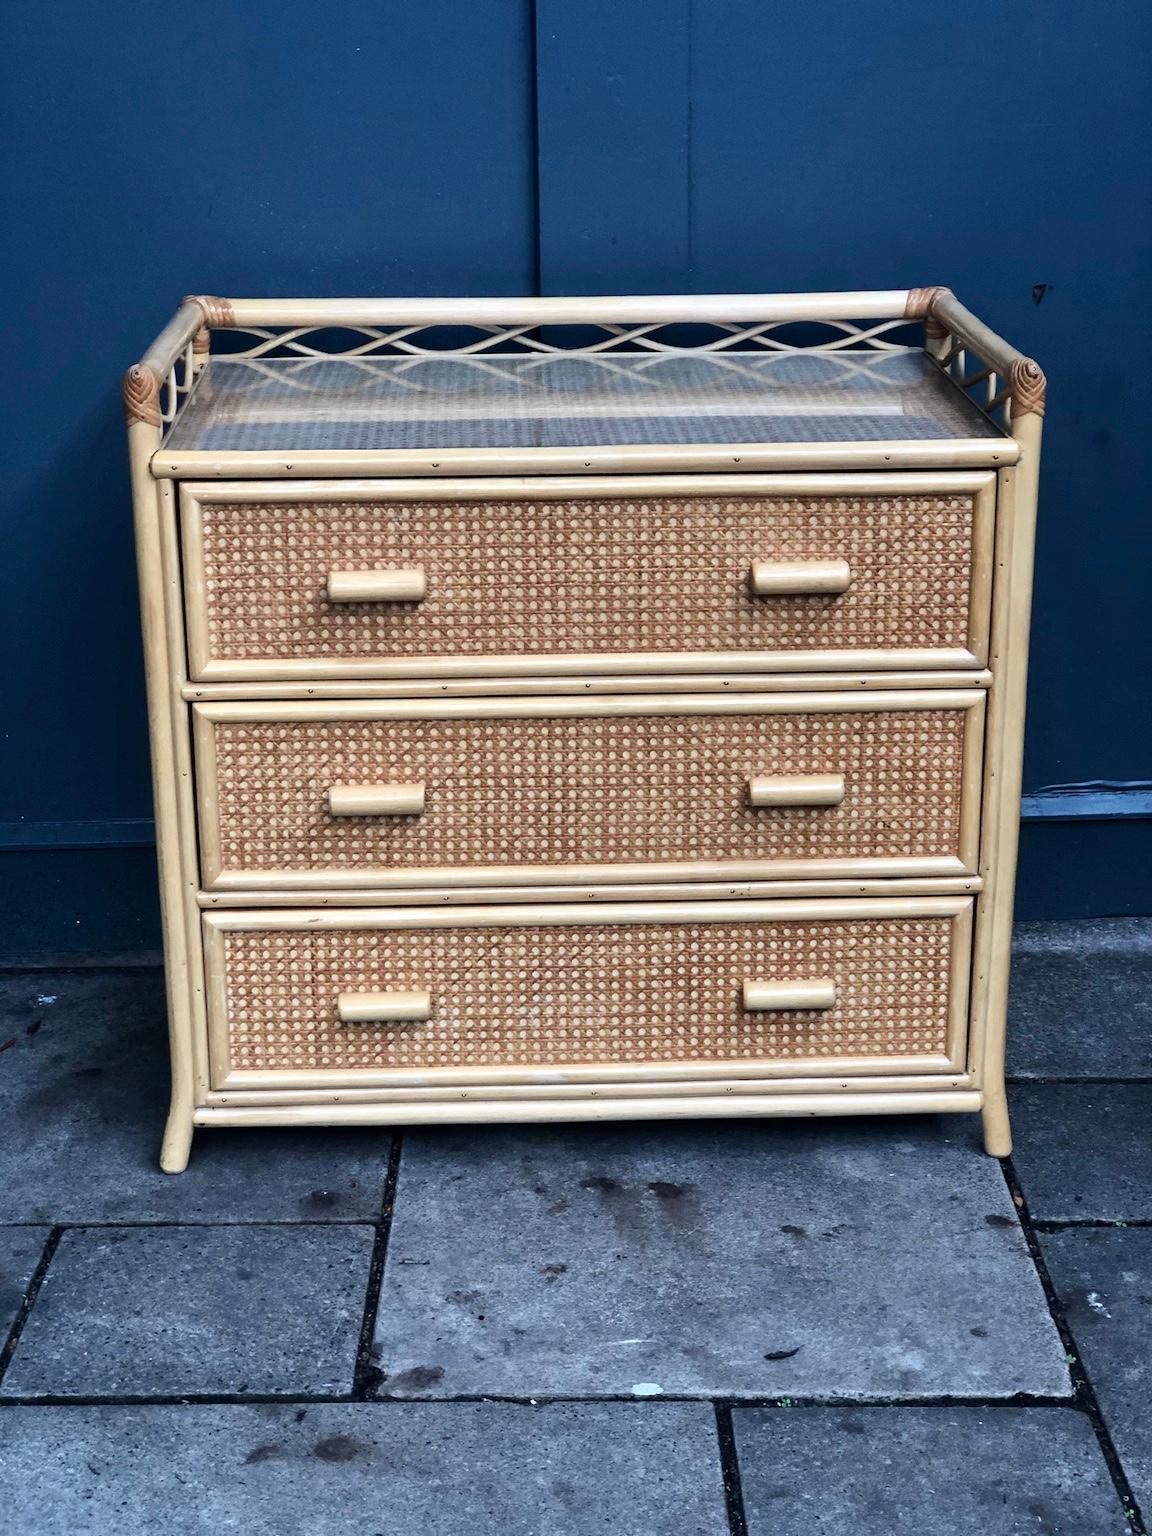 Midcentury rattan / cane chest of drawers by Angraves, England, 1970s

This is a beautiful natural in color rattan / cane chest of drawers.
Made by English company ‘Angraves’ Brook St, Leicester, part of the “Invincible” range

The chest of